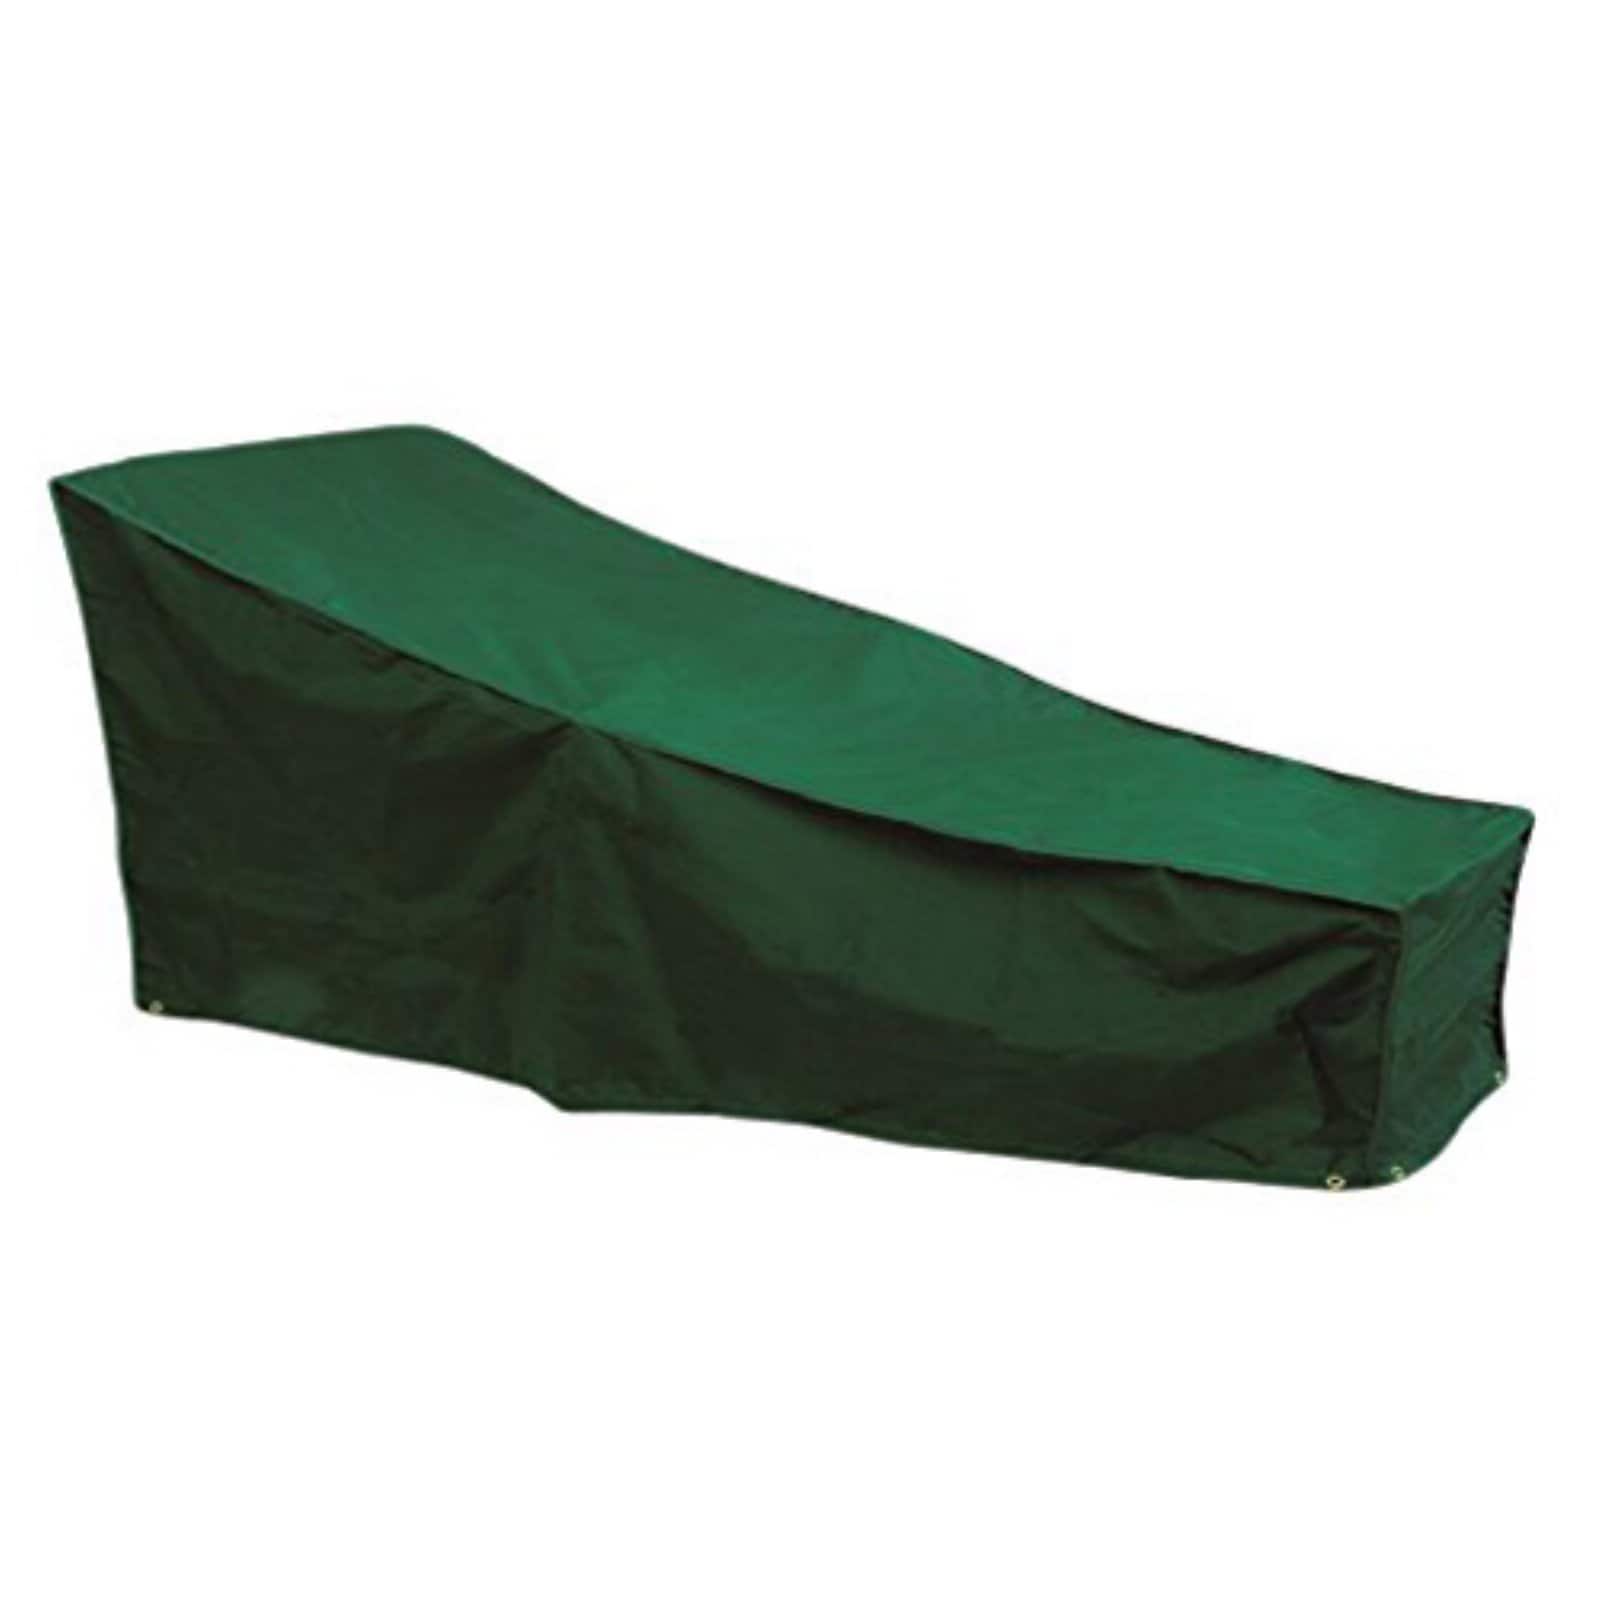 Bosmere Waterproof Green 87 in. Lounge Sunbed Cover - image 3 of 3